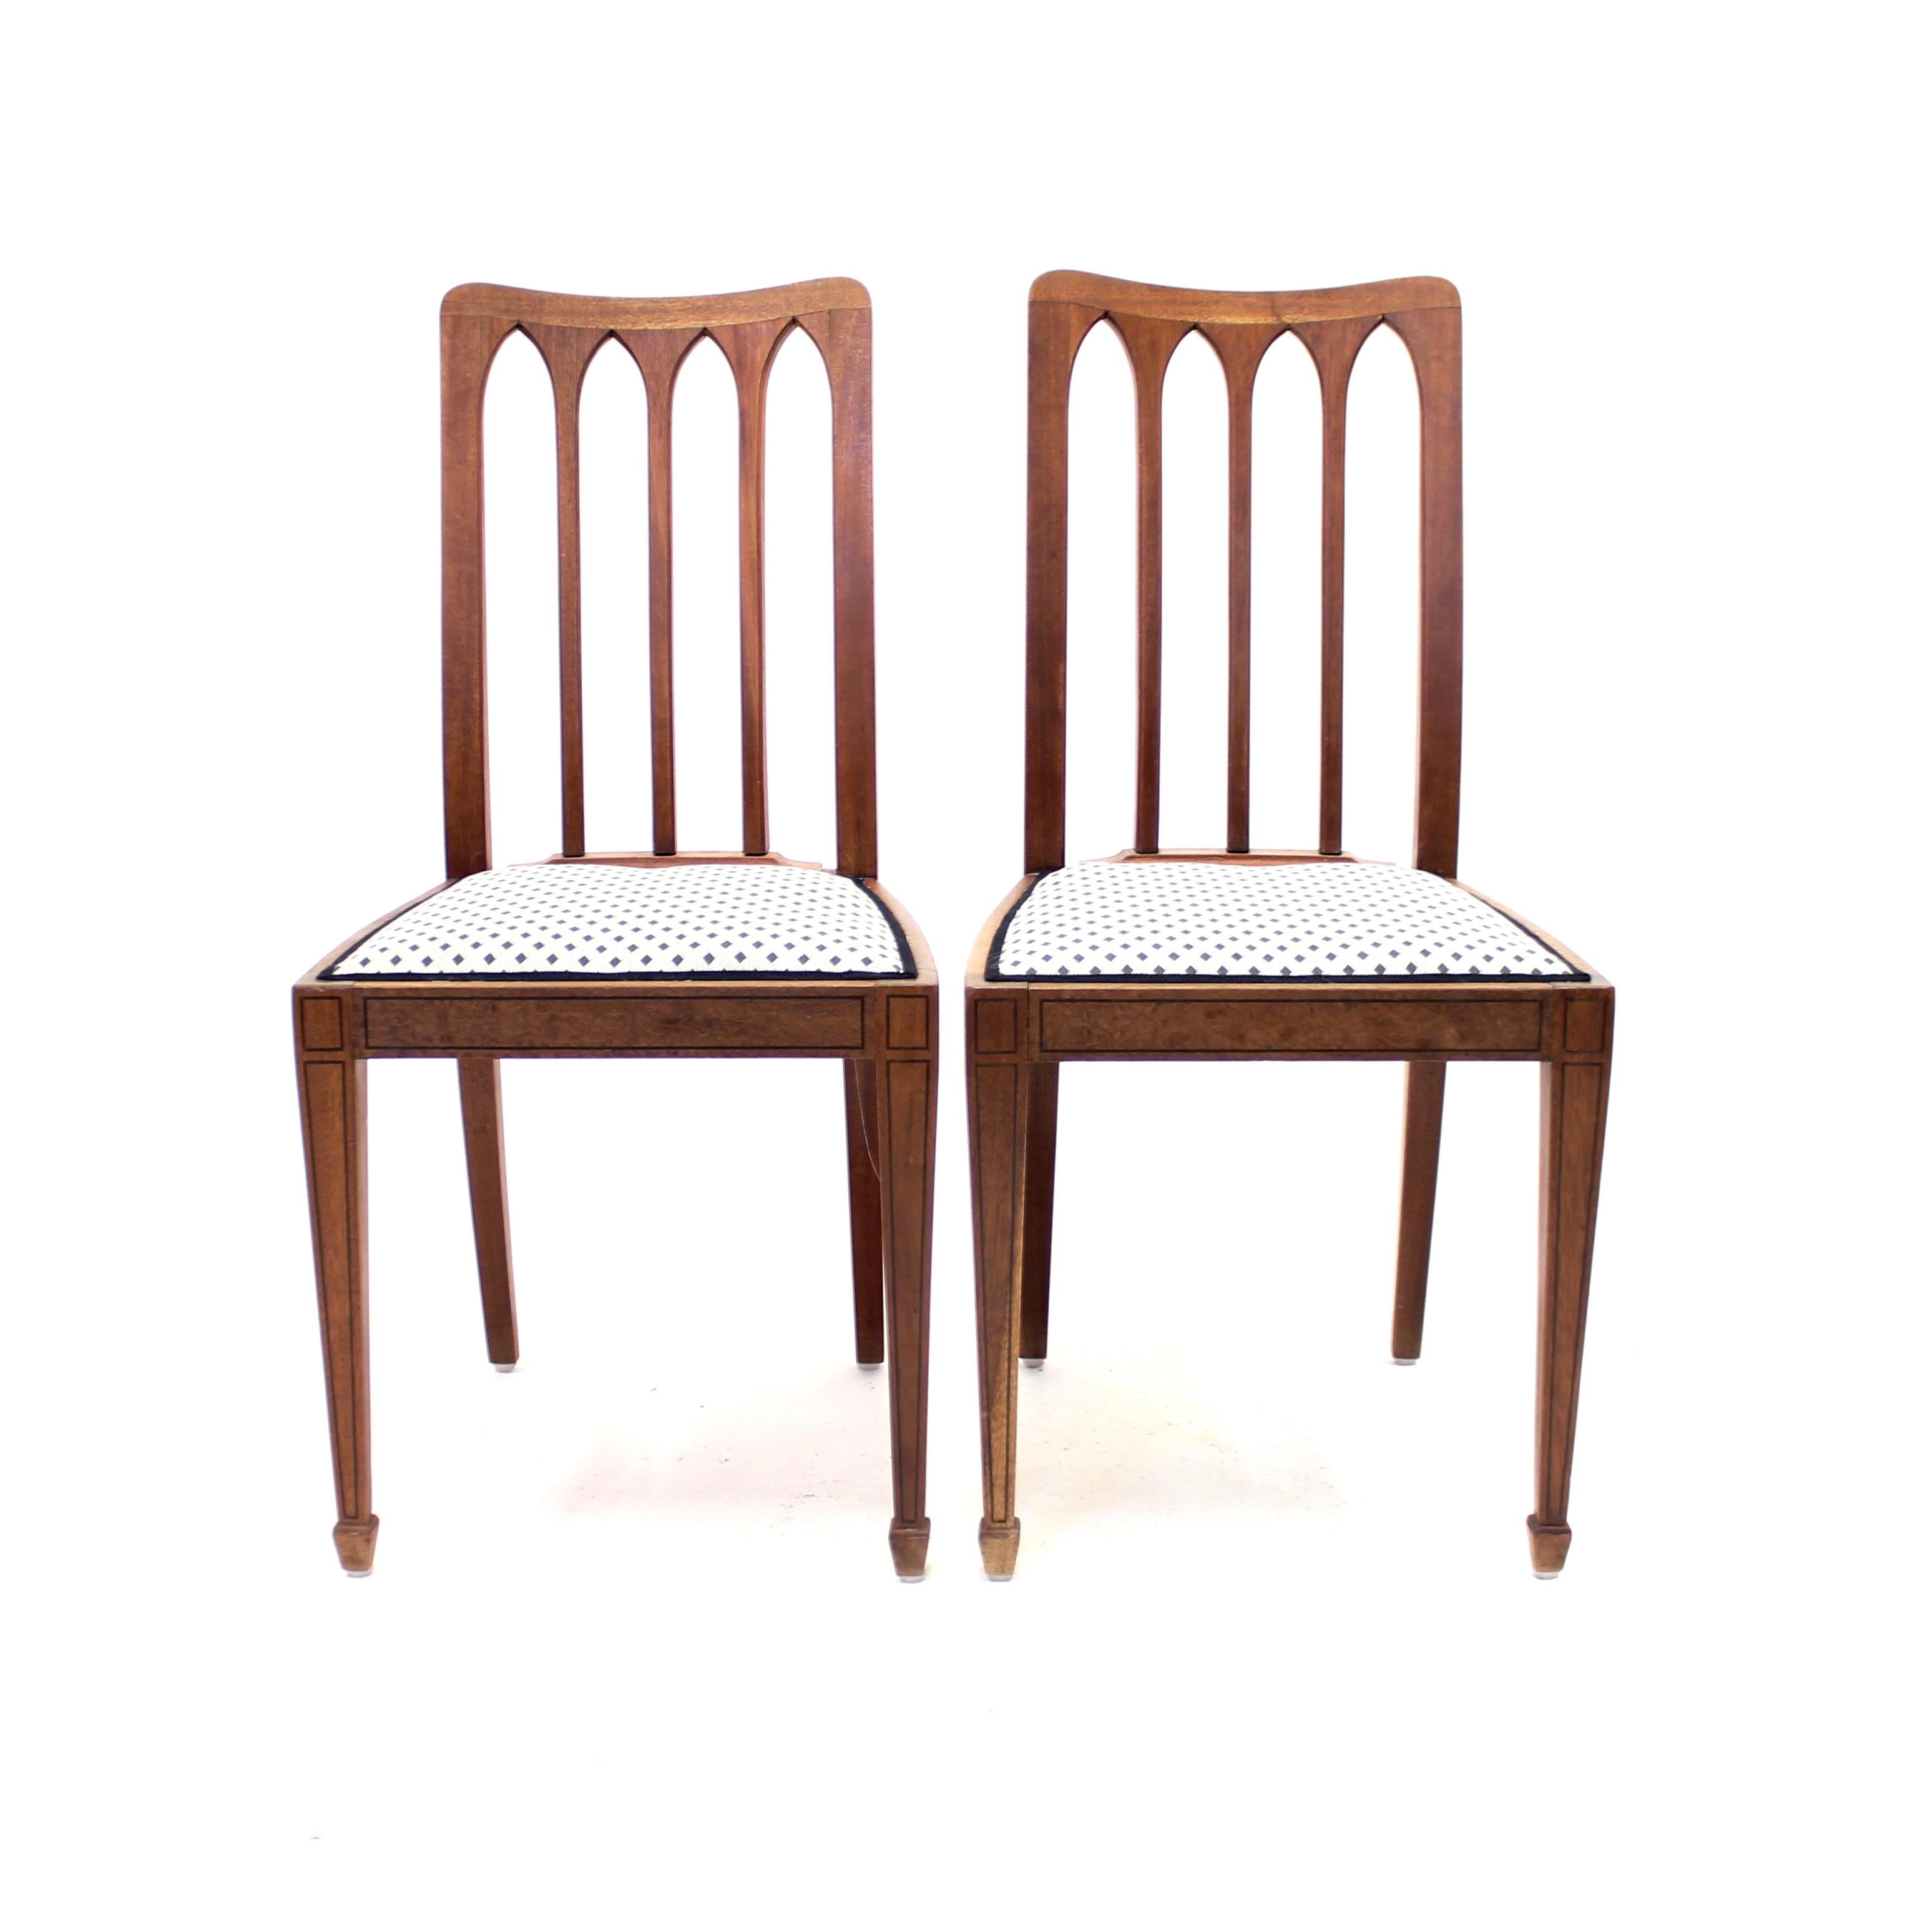 Set of 8 Oak Architectural Arts & Crafts Chairs, Early 20th Century 2